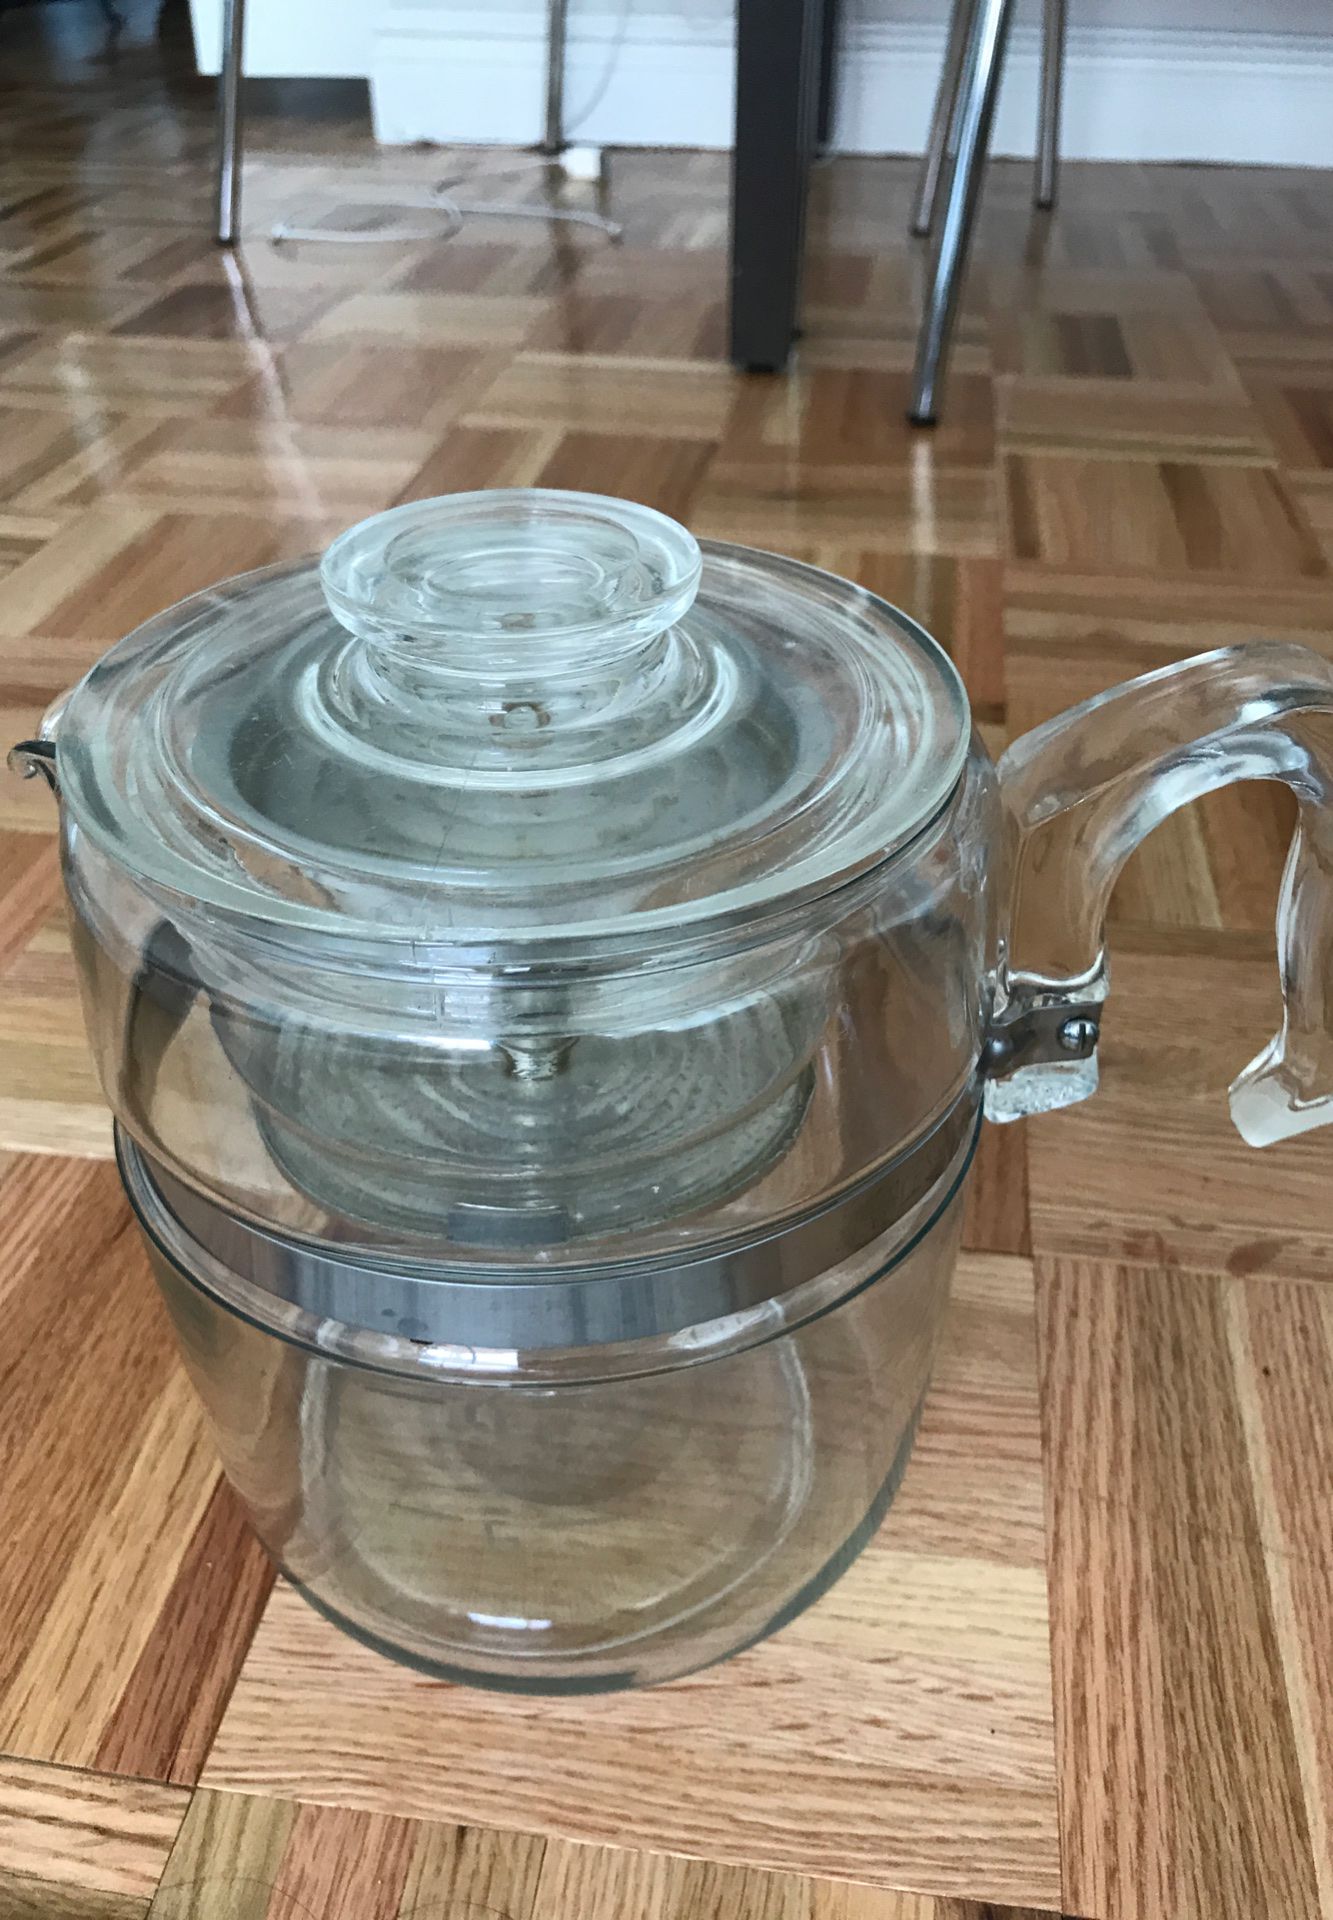 Stainless PYREX tea pot made in the USA